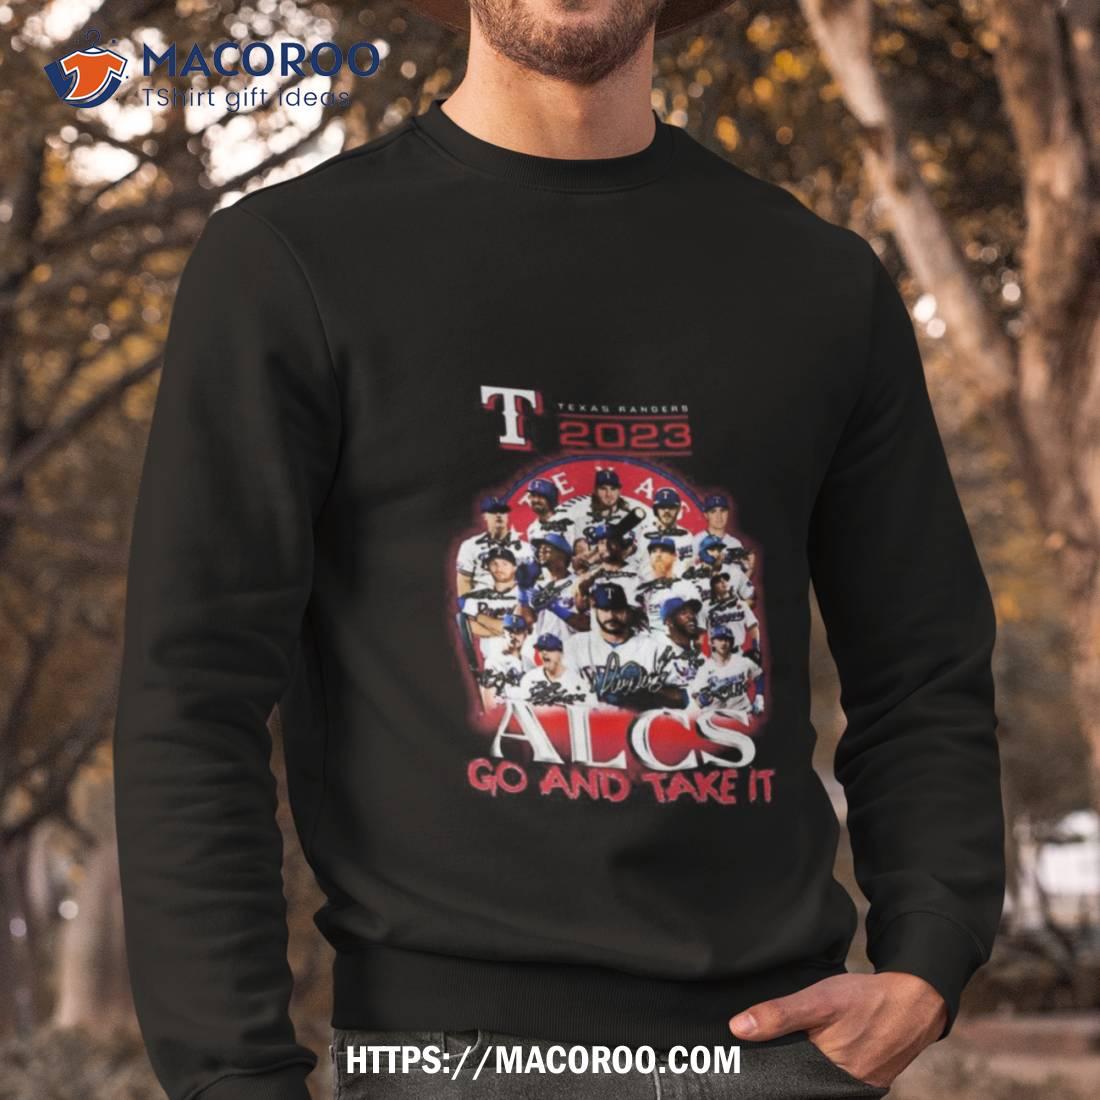 Texas Rangers 2023 Alcs Go And Take It Signatures Shirt